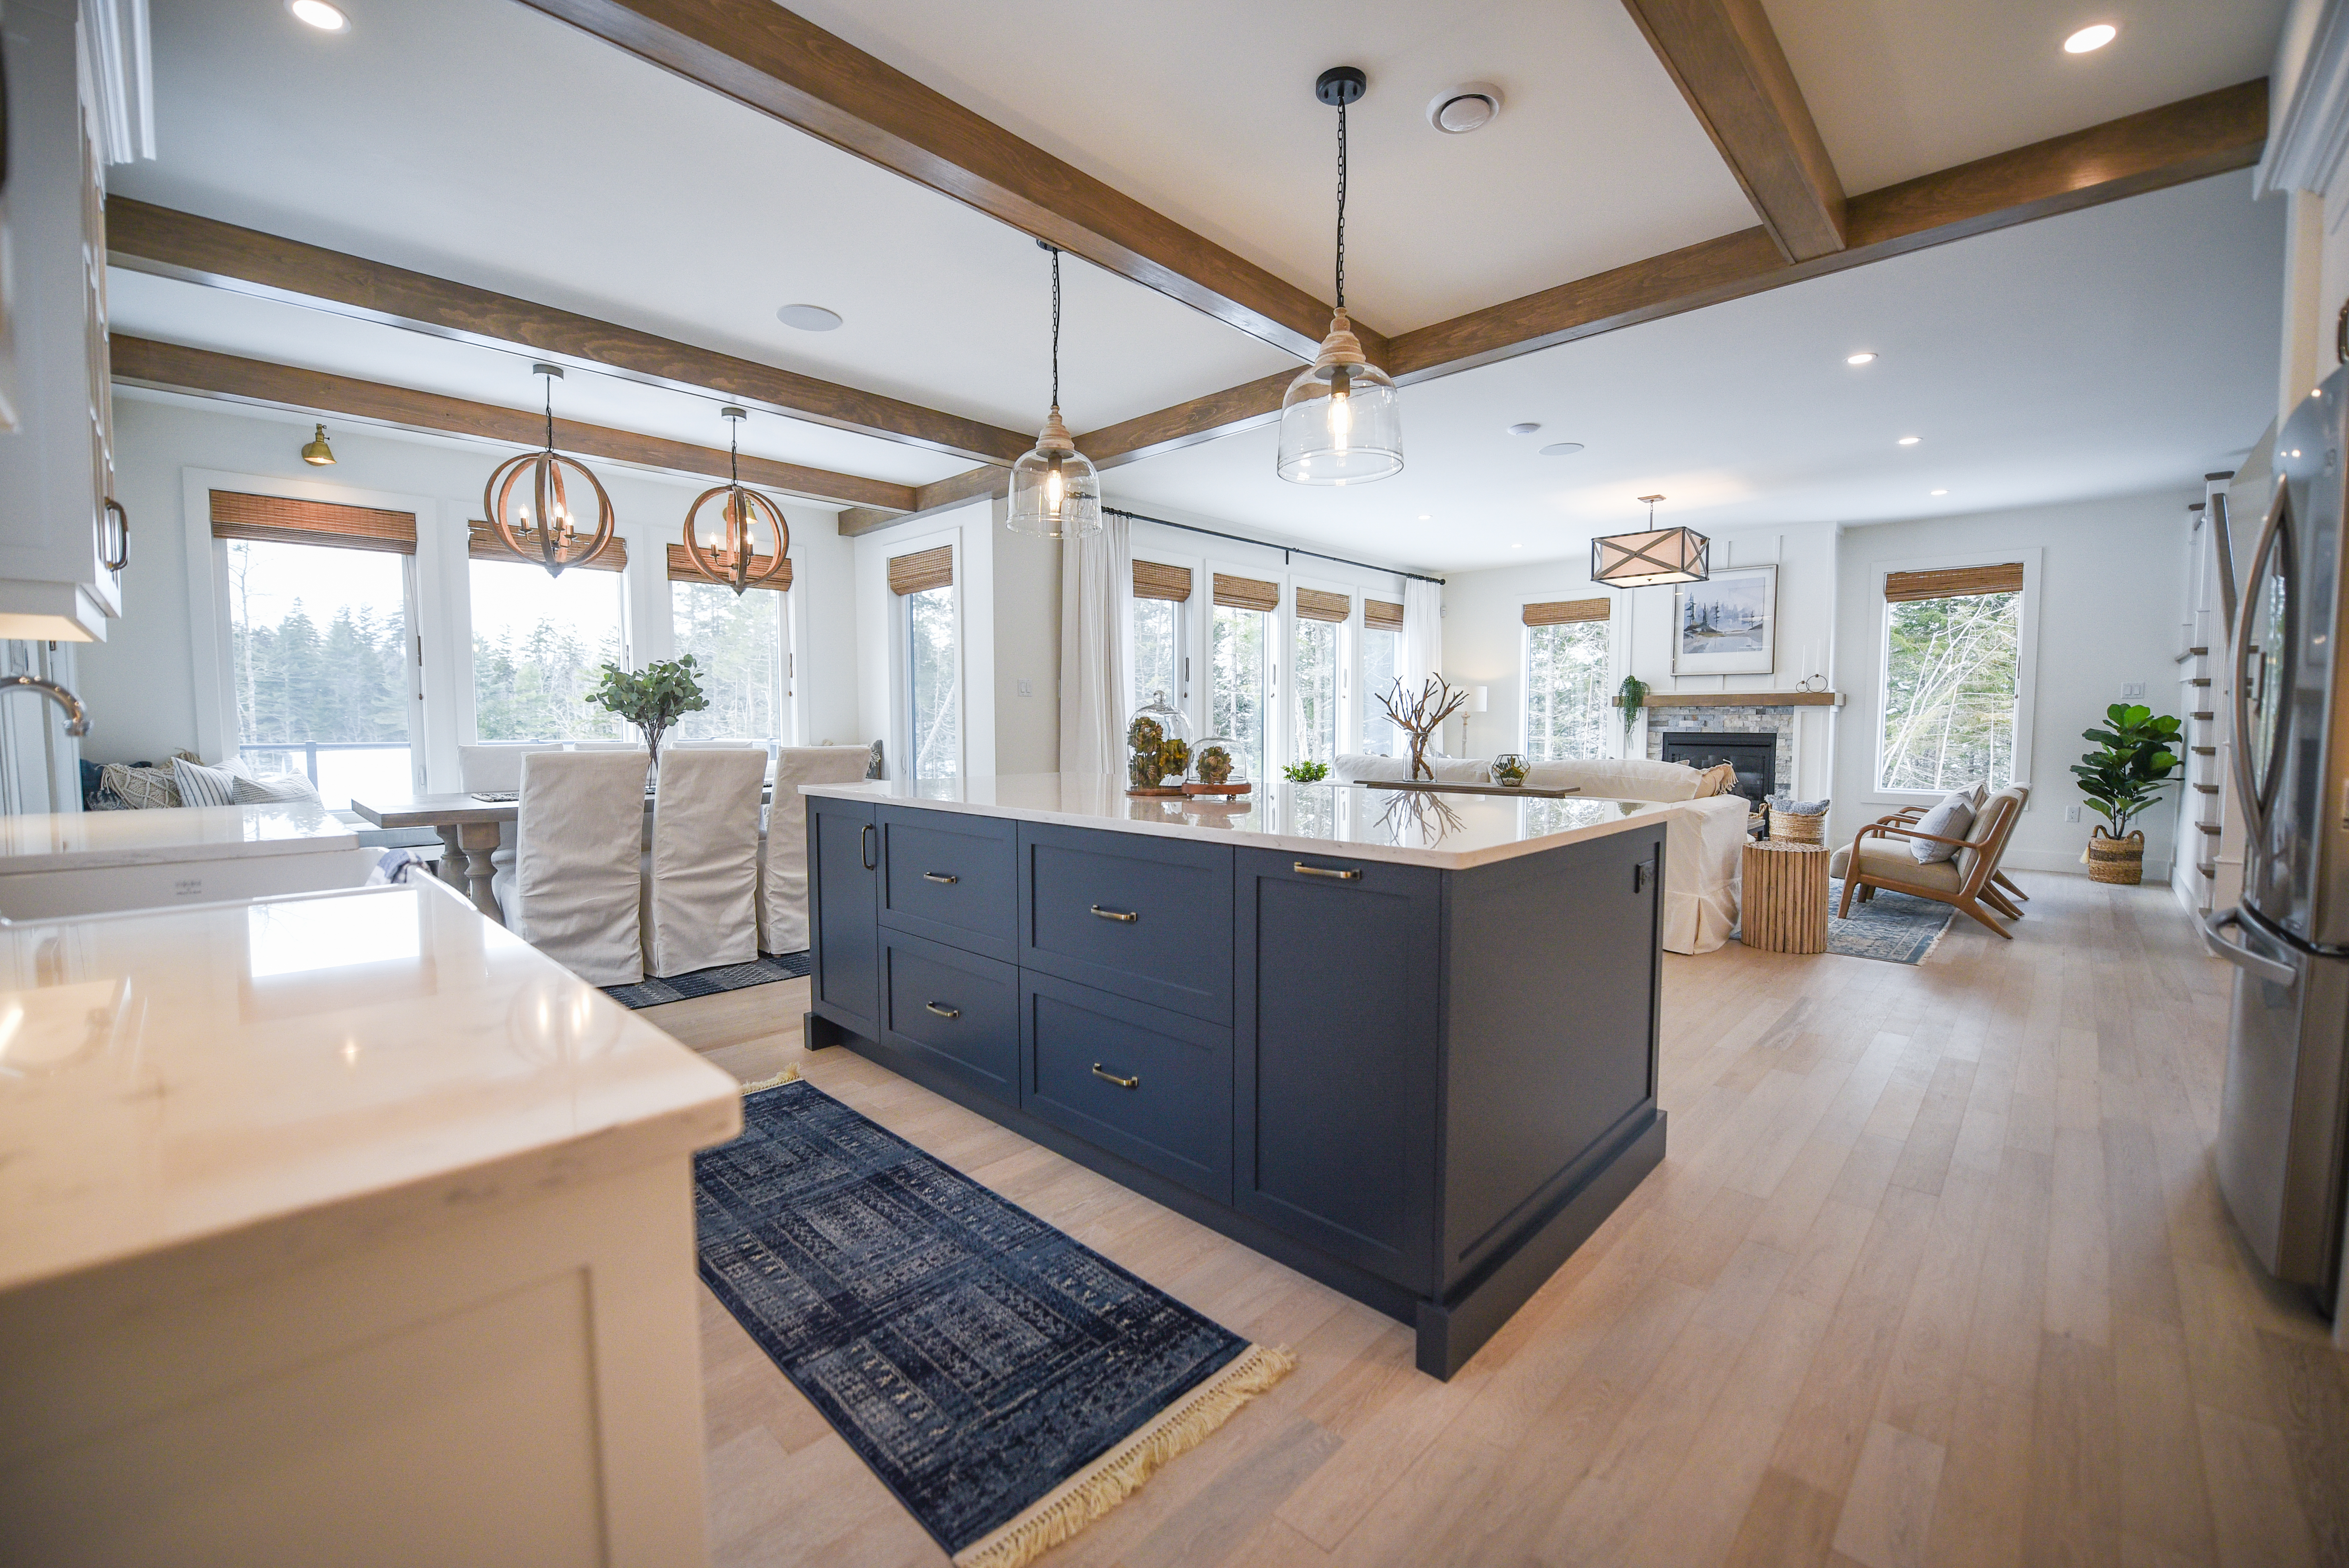 Inspiration Gallery: 2019 Lottery Home